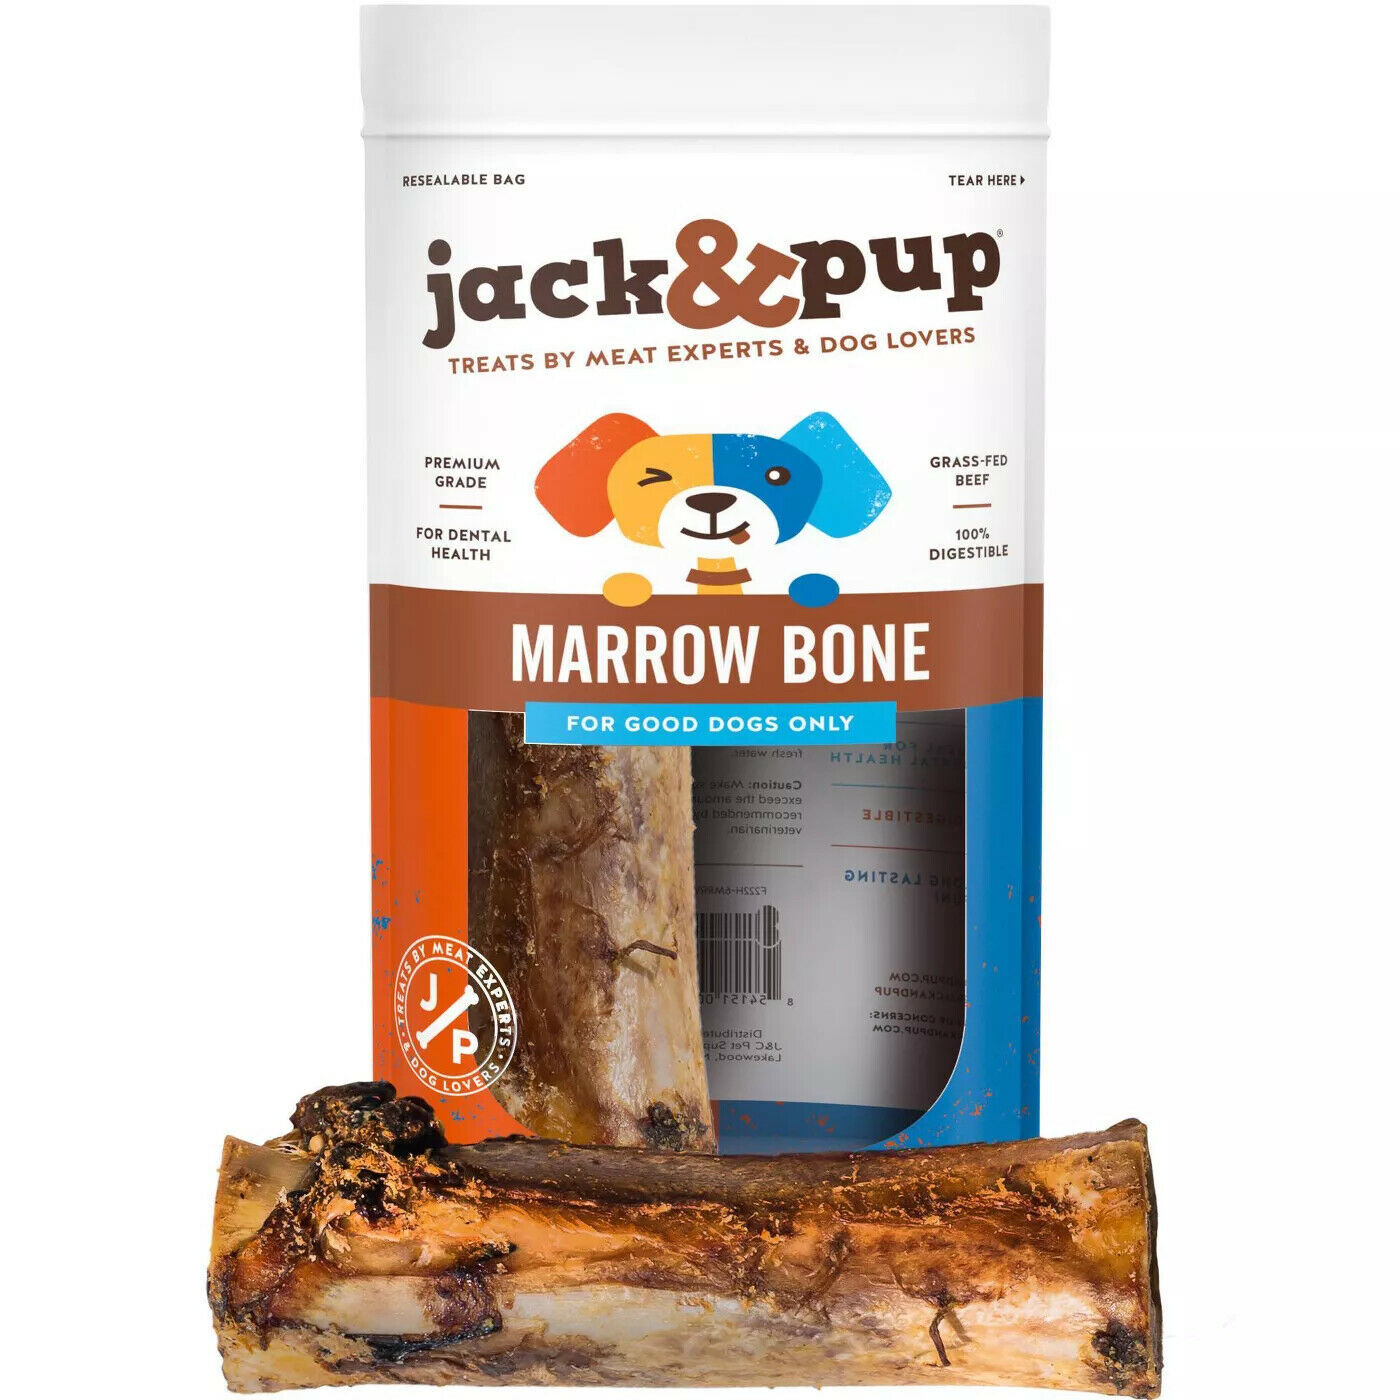 Primary image for Jack&Pup Premium Grade Roasted Beef Marrow Bone Treats (2 Pack) – 6” Long